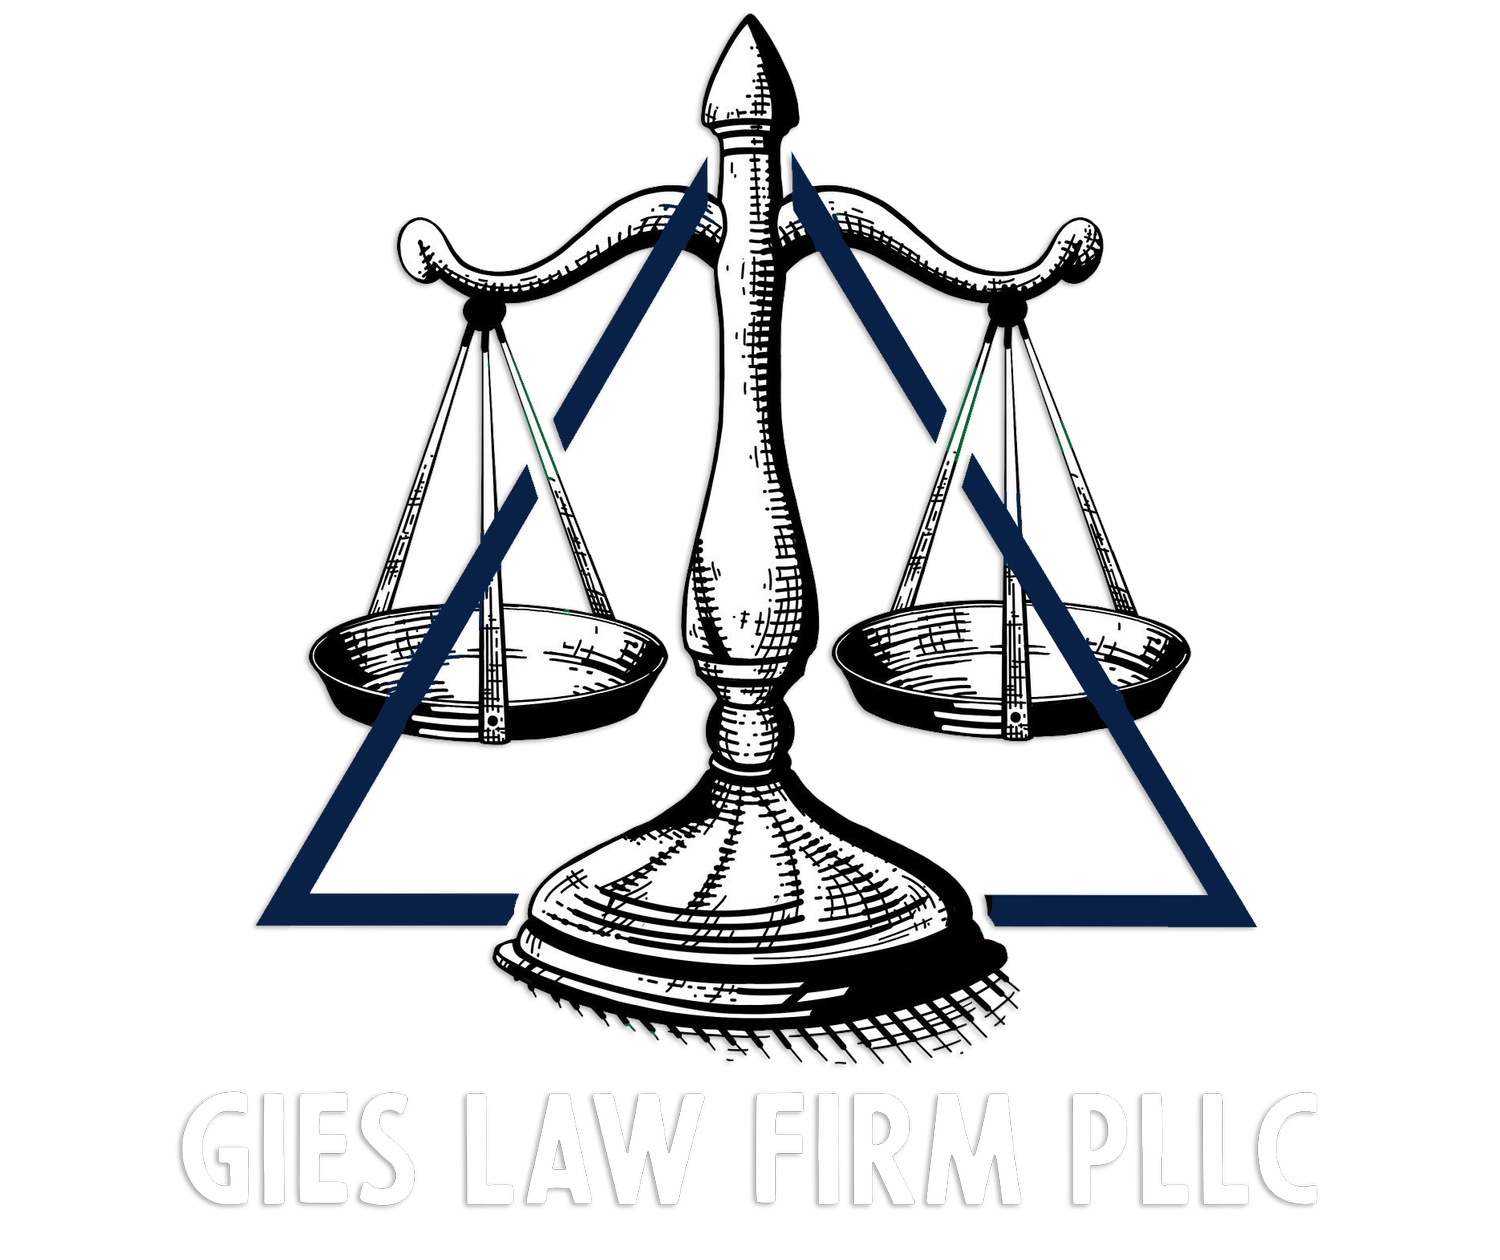 Gies Law Firm